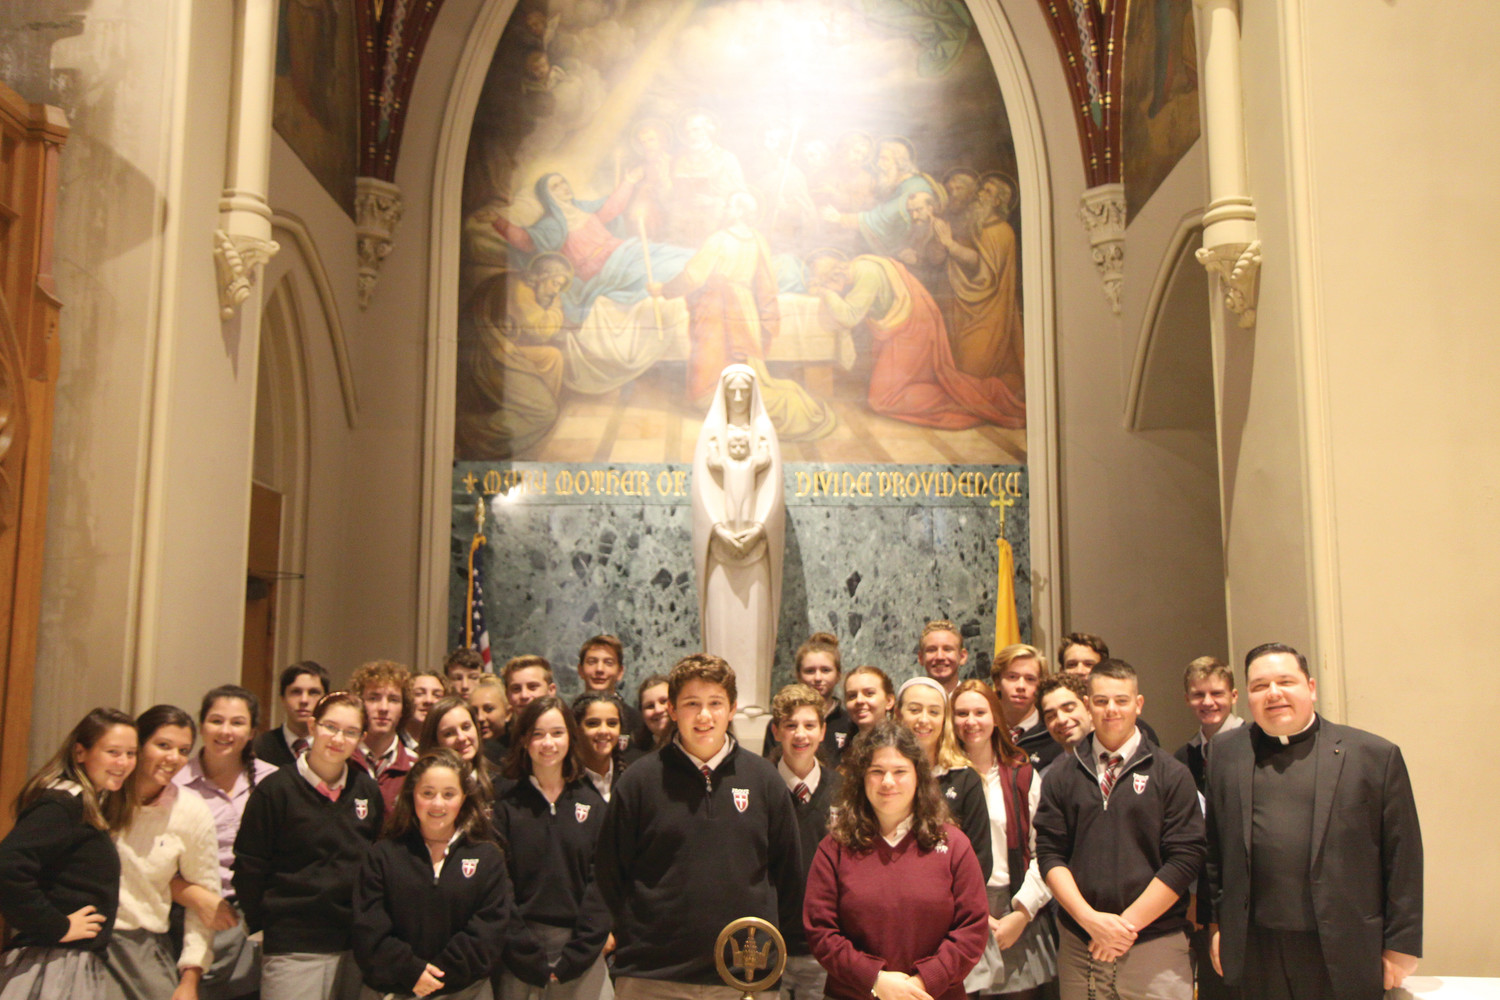 Students, along with Chaplain Father Joseph Upton, pose for a photo before a statue of Our Lady of Providence at the Cathedral of Saints Peter and Paul.